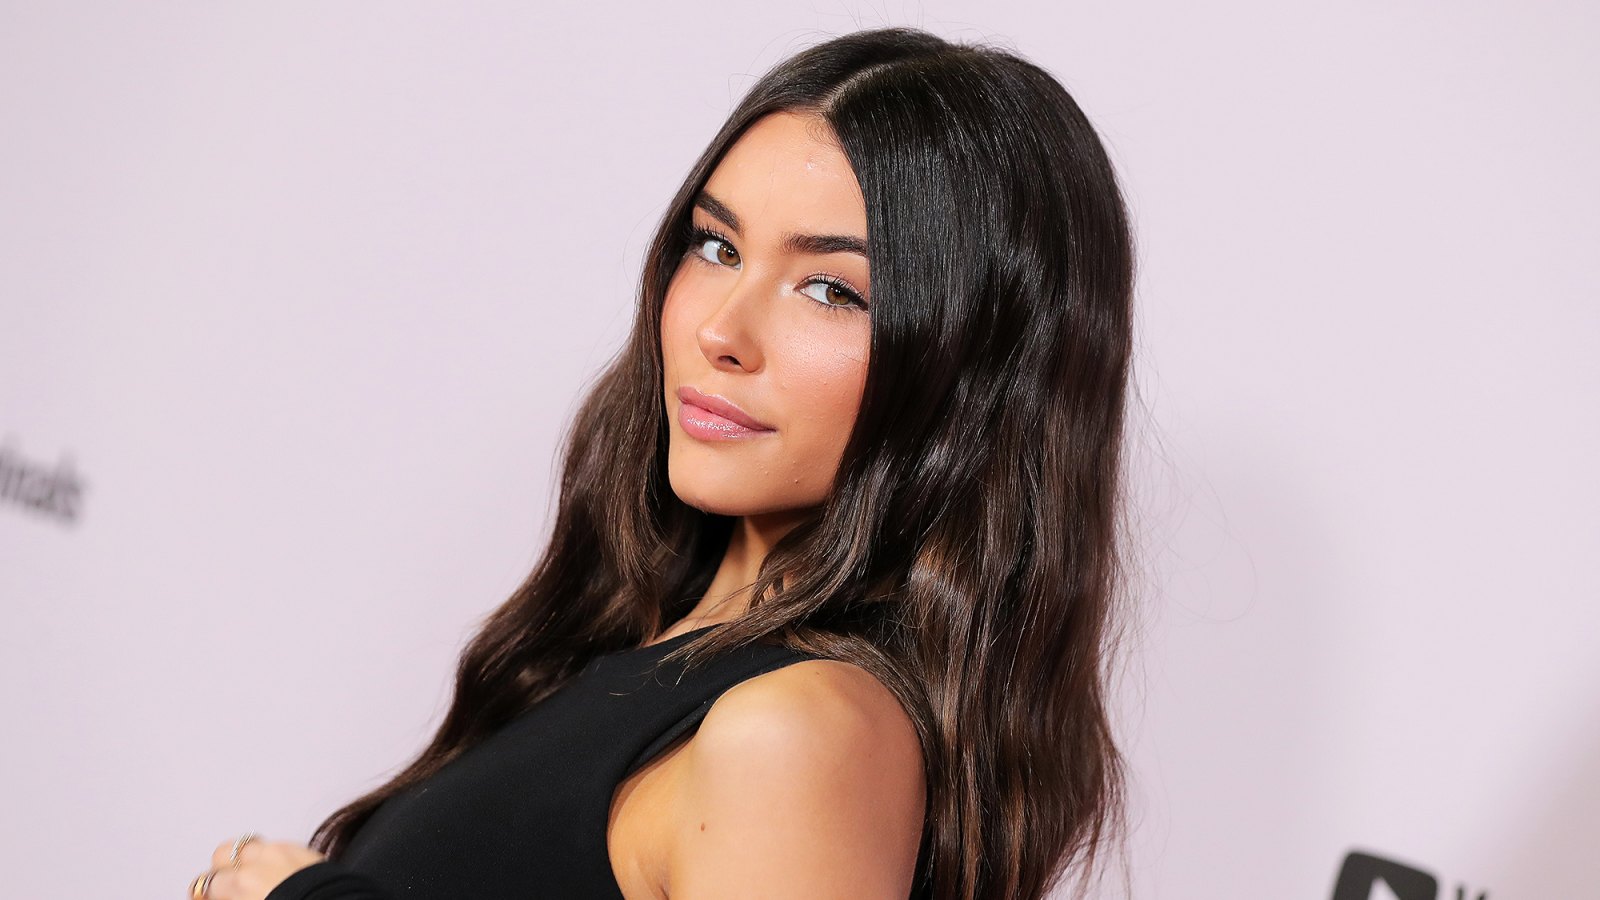 Madison Beer Says Shes 1 Year Officially Clean of Self-Harm